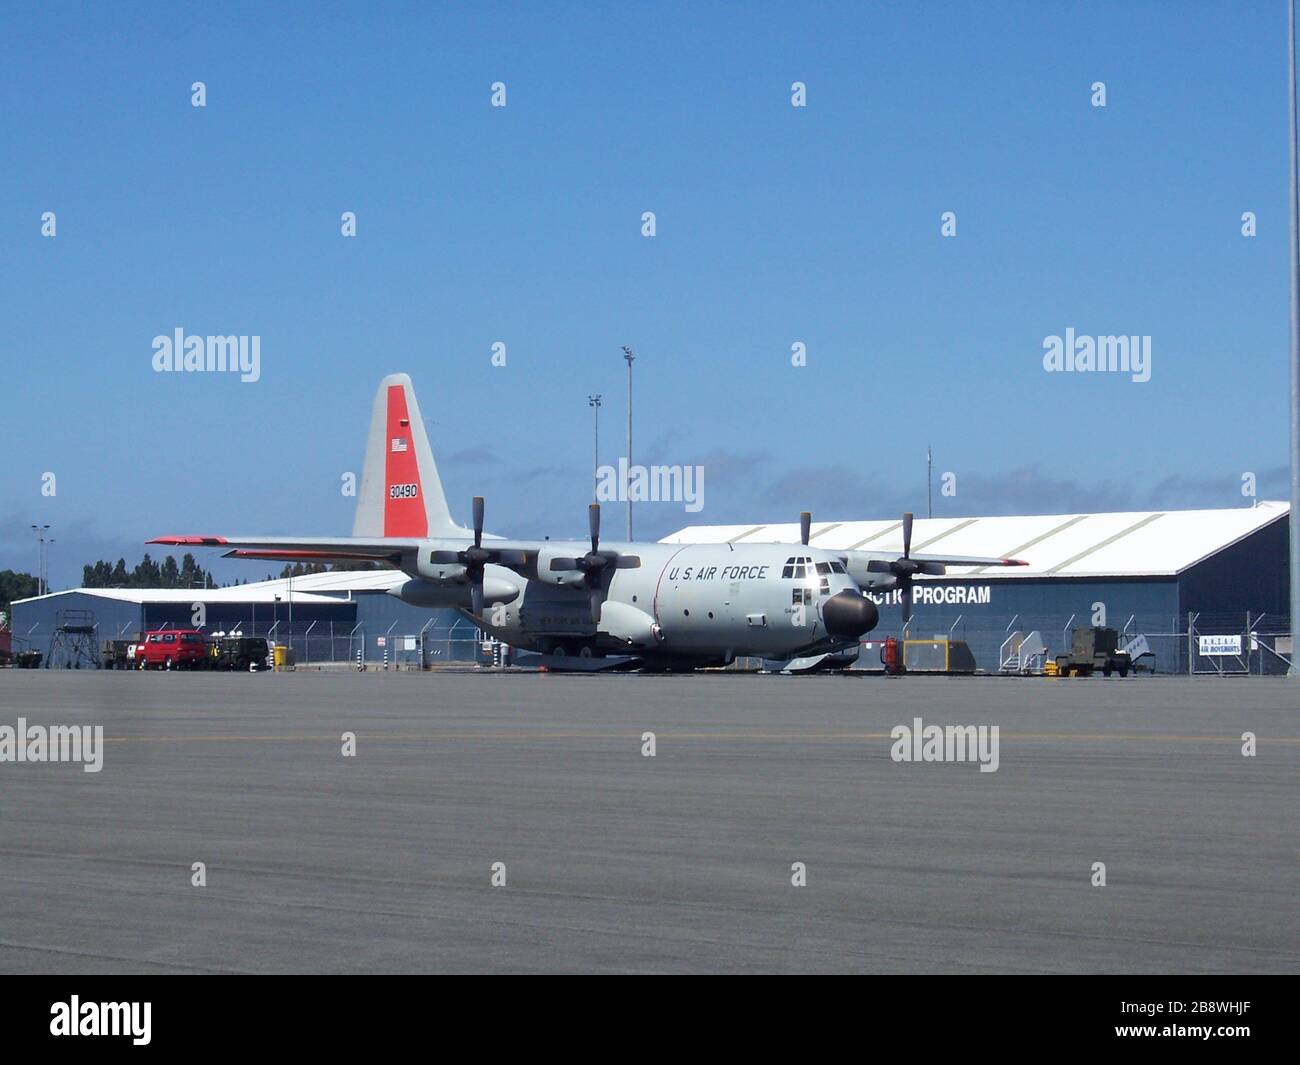 "English: LC-130 aircraft operated by the en:109th Airlift Wing from the en:New York Air National Guard at the en:Christchurch International Airport, en:New Zealand.; 17 December 2007 (original upload date); Transferred from en.wikipedia to Commons by Smoth 007.; The original uploader was Ndunruh at English Wikipedia.; " Stock Photo